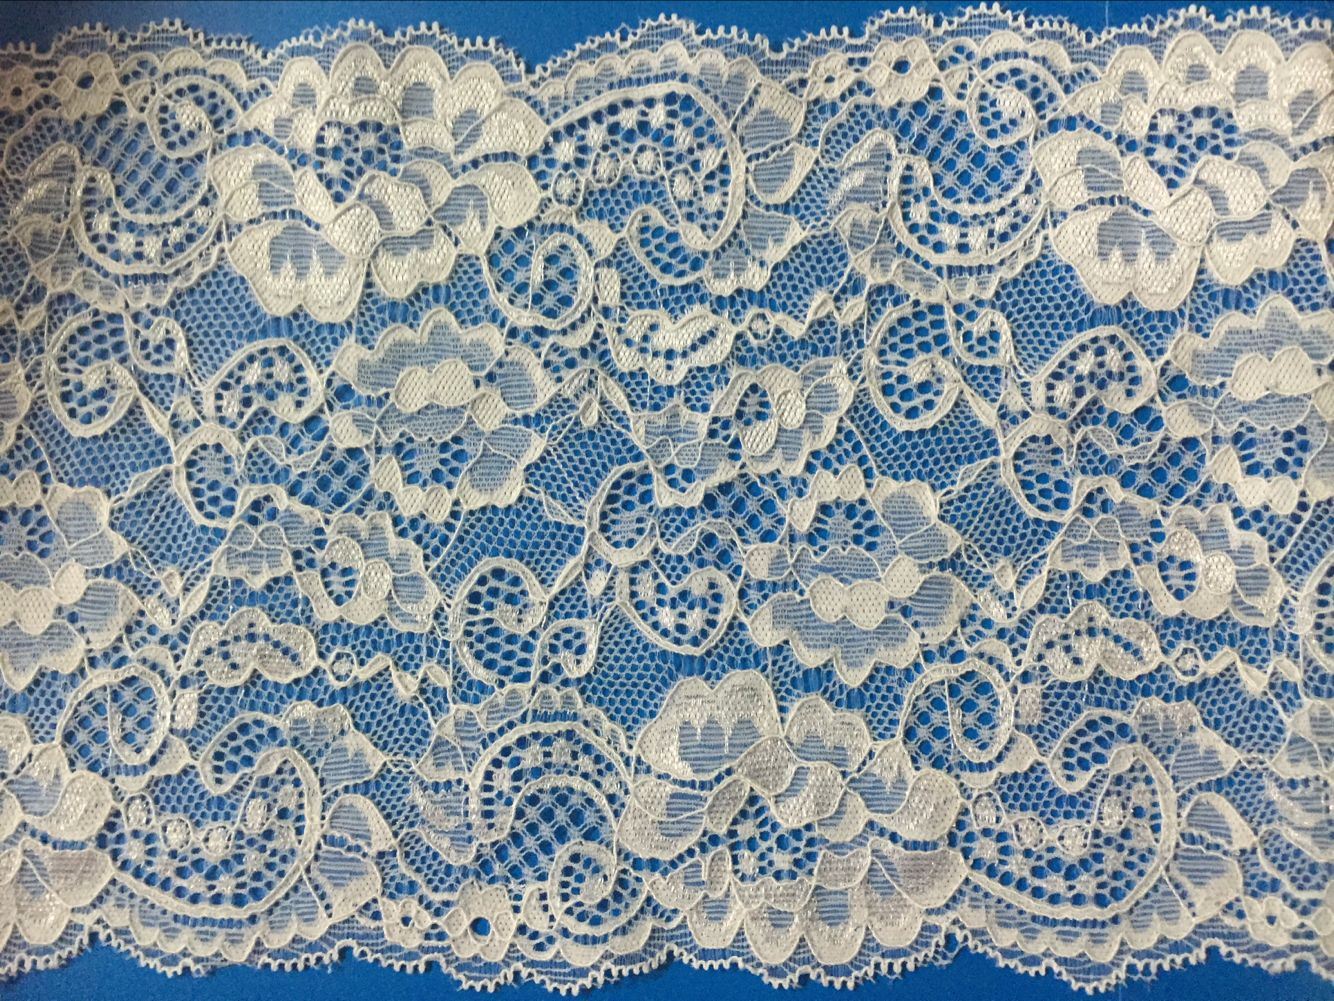 Elastic Lace Made of Nylon & Spandex. Cheap Price, Customized Design.